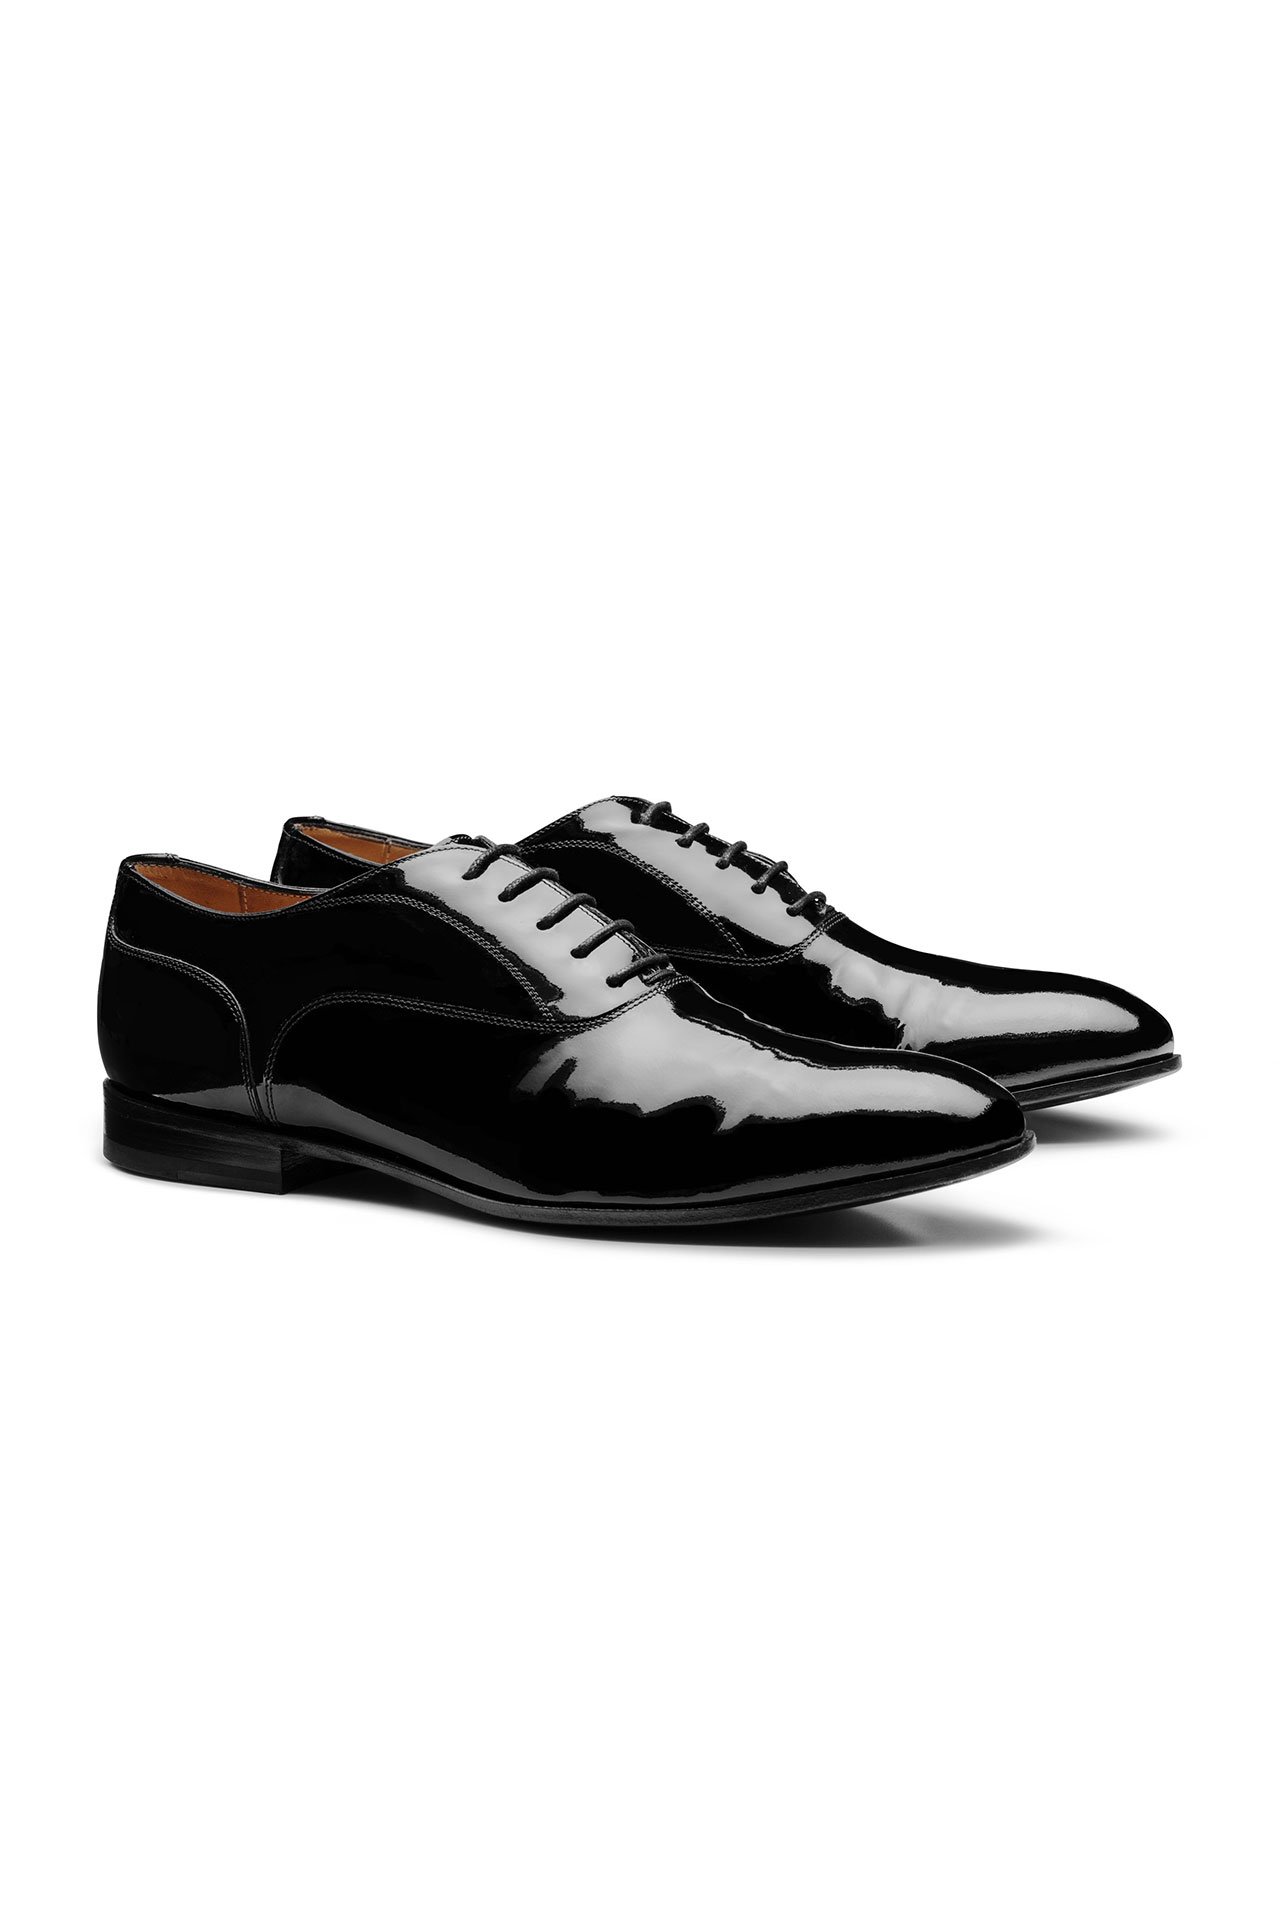 Buy Black Formal Shoes for Men by INFLATION Online | Ajio.com